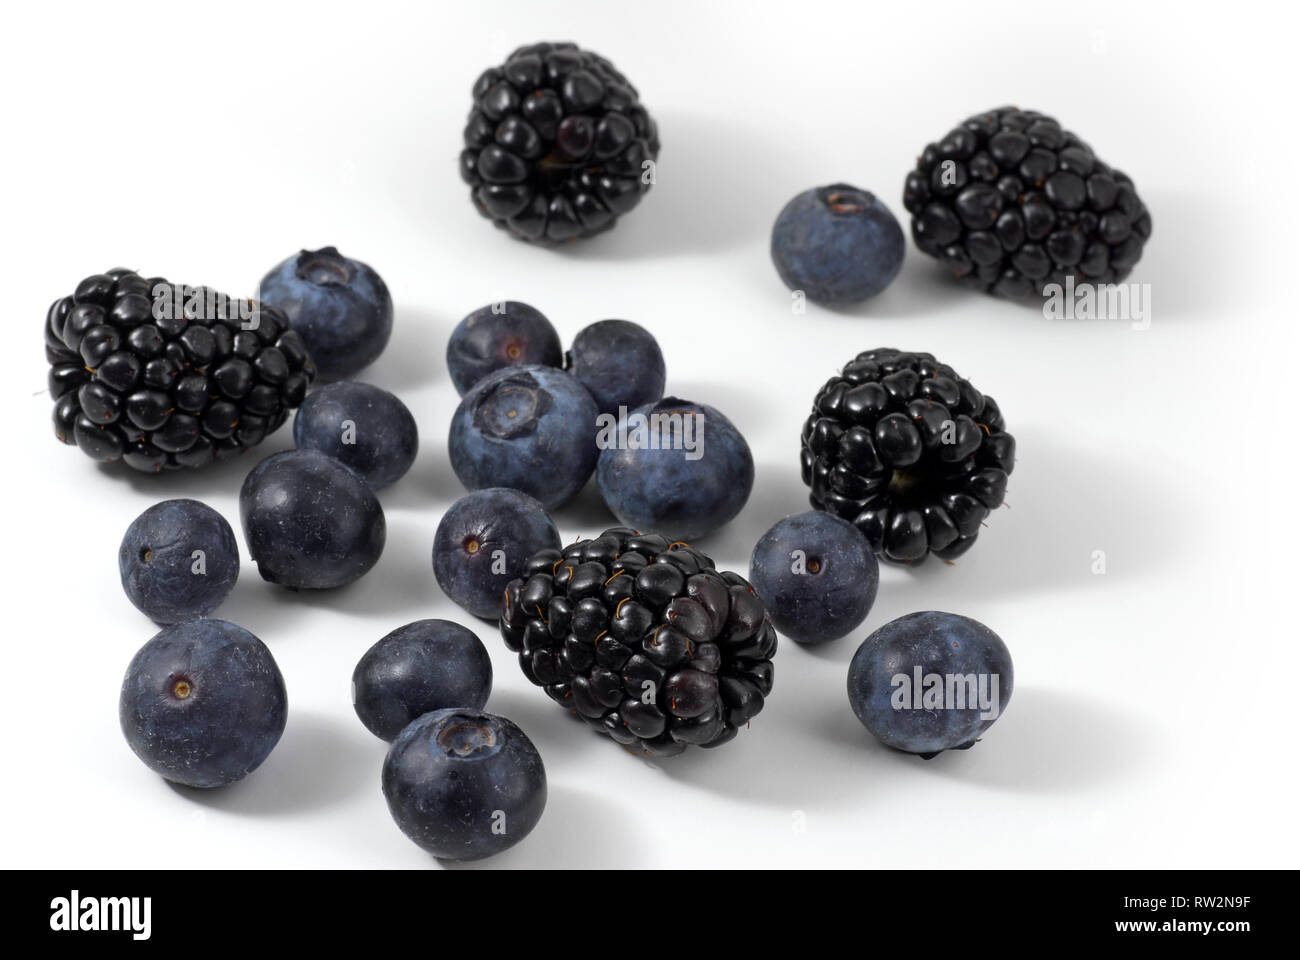 Blueberries and blackberries on white background Stock Photo